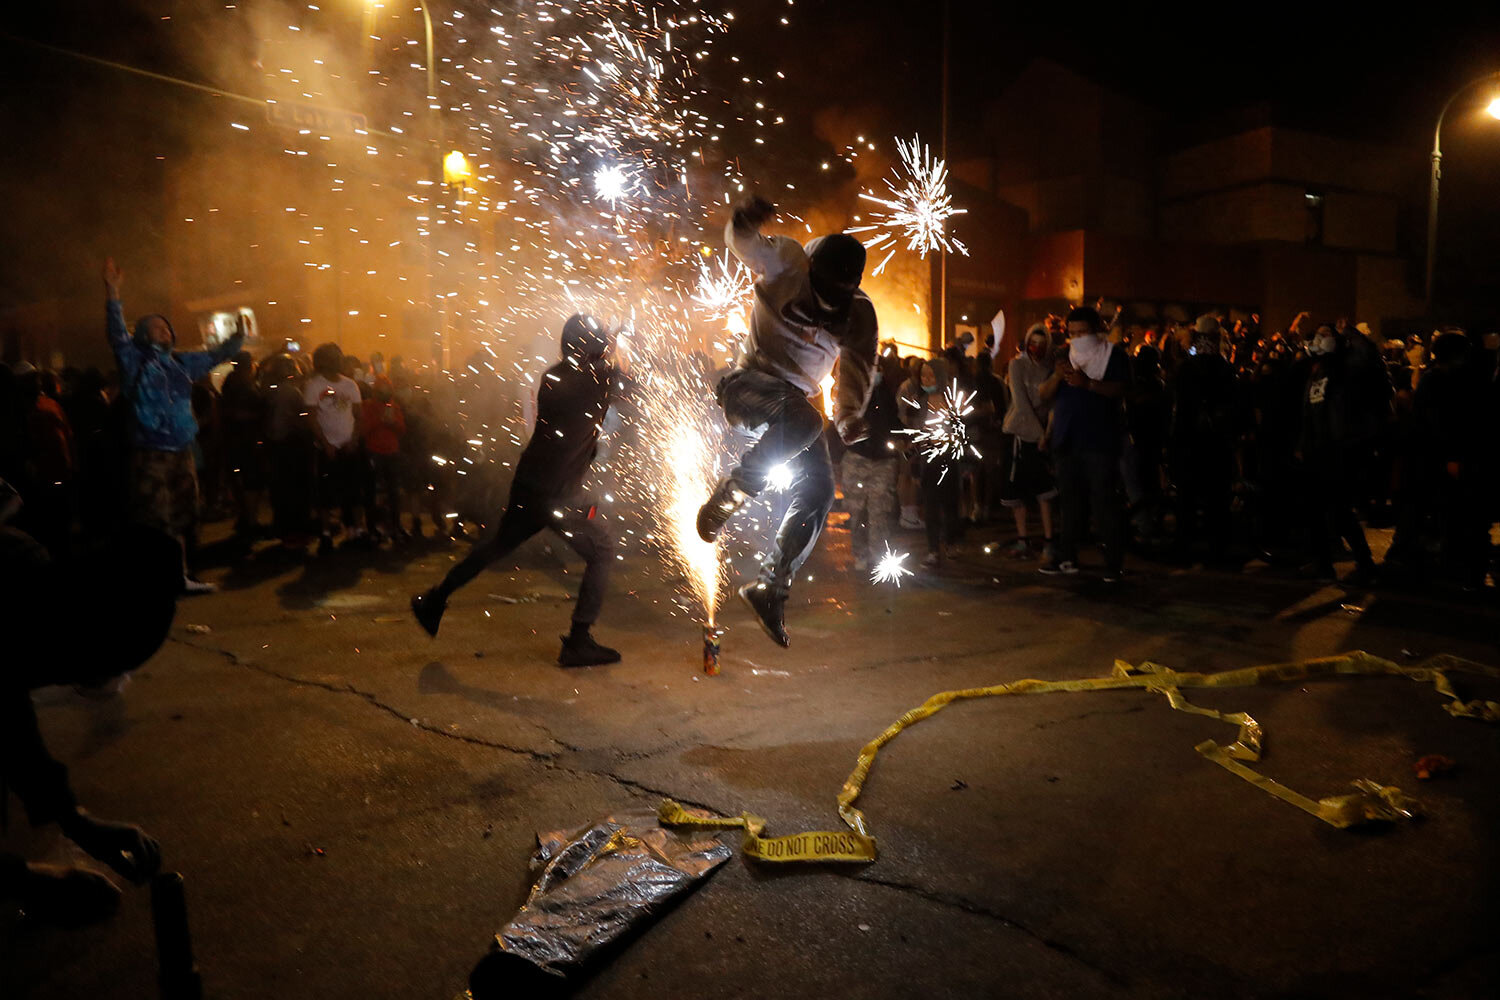  Protesters set off fireworks as a fire burns at the Minneapolis police 3rd Precinct building Thursday, May 28, 2020, in Minneapolis. (AP Photo/Julio Cortez) 